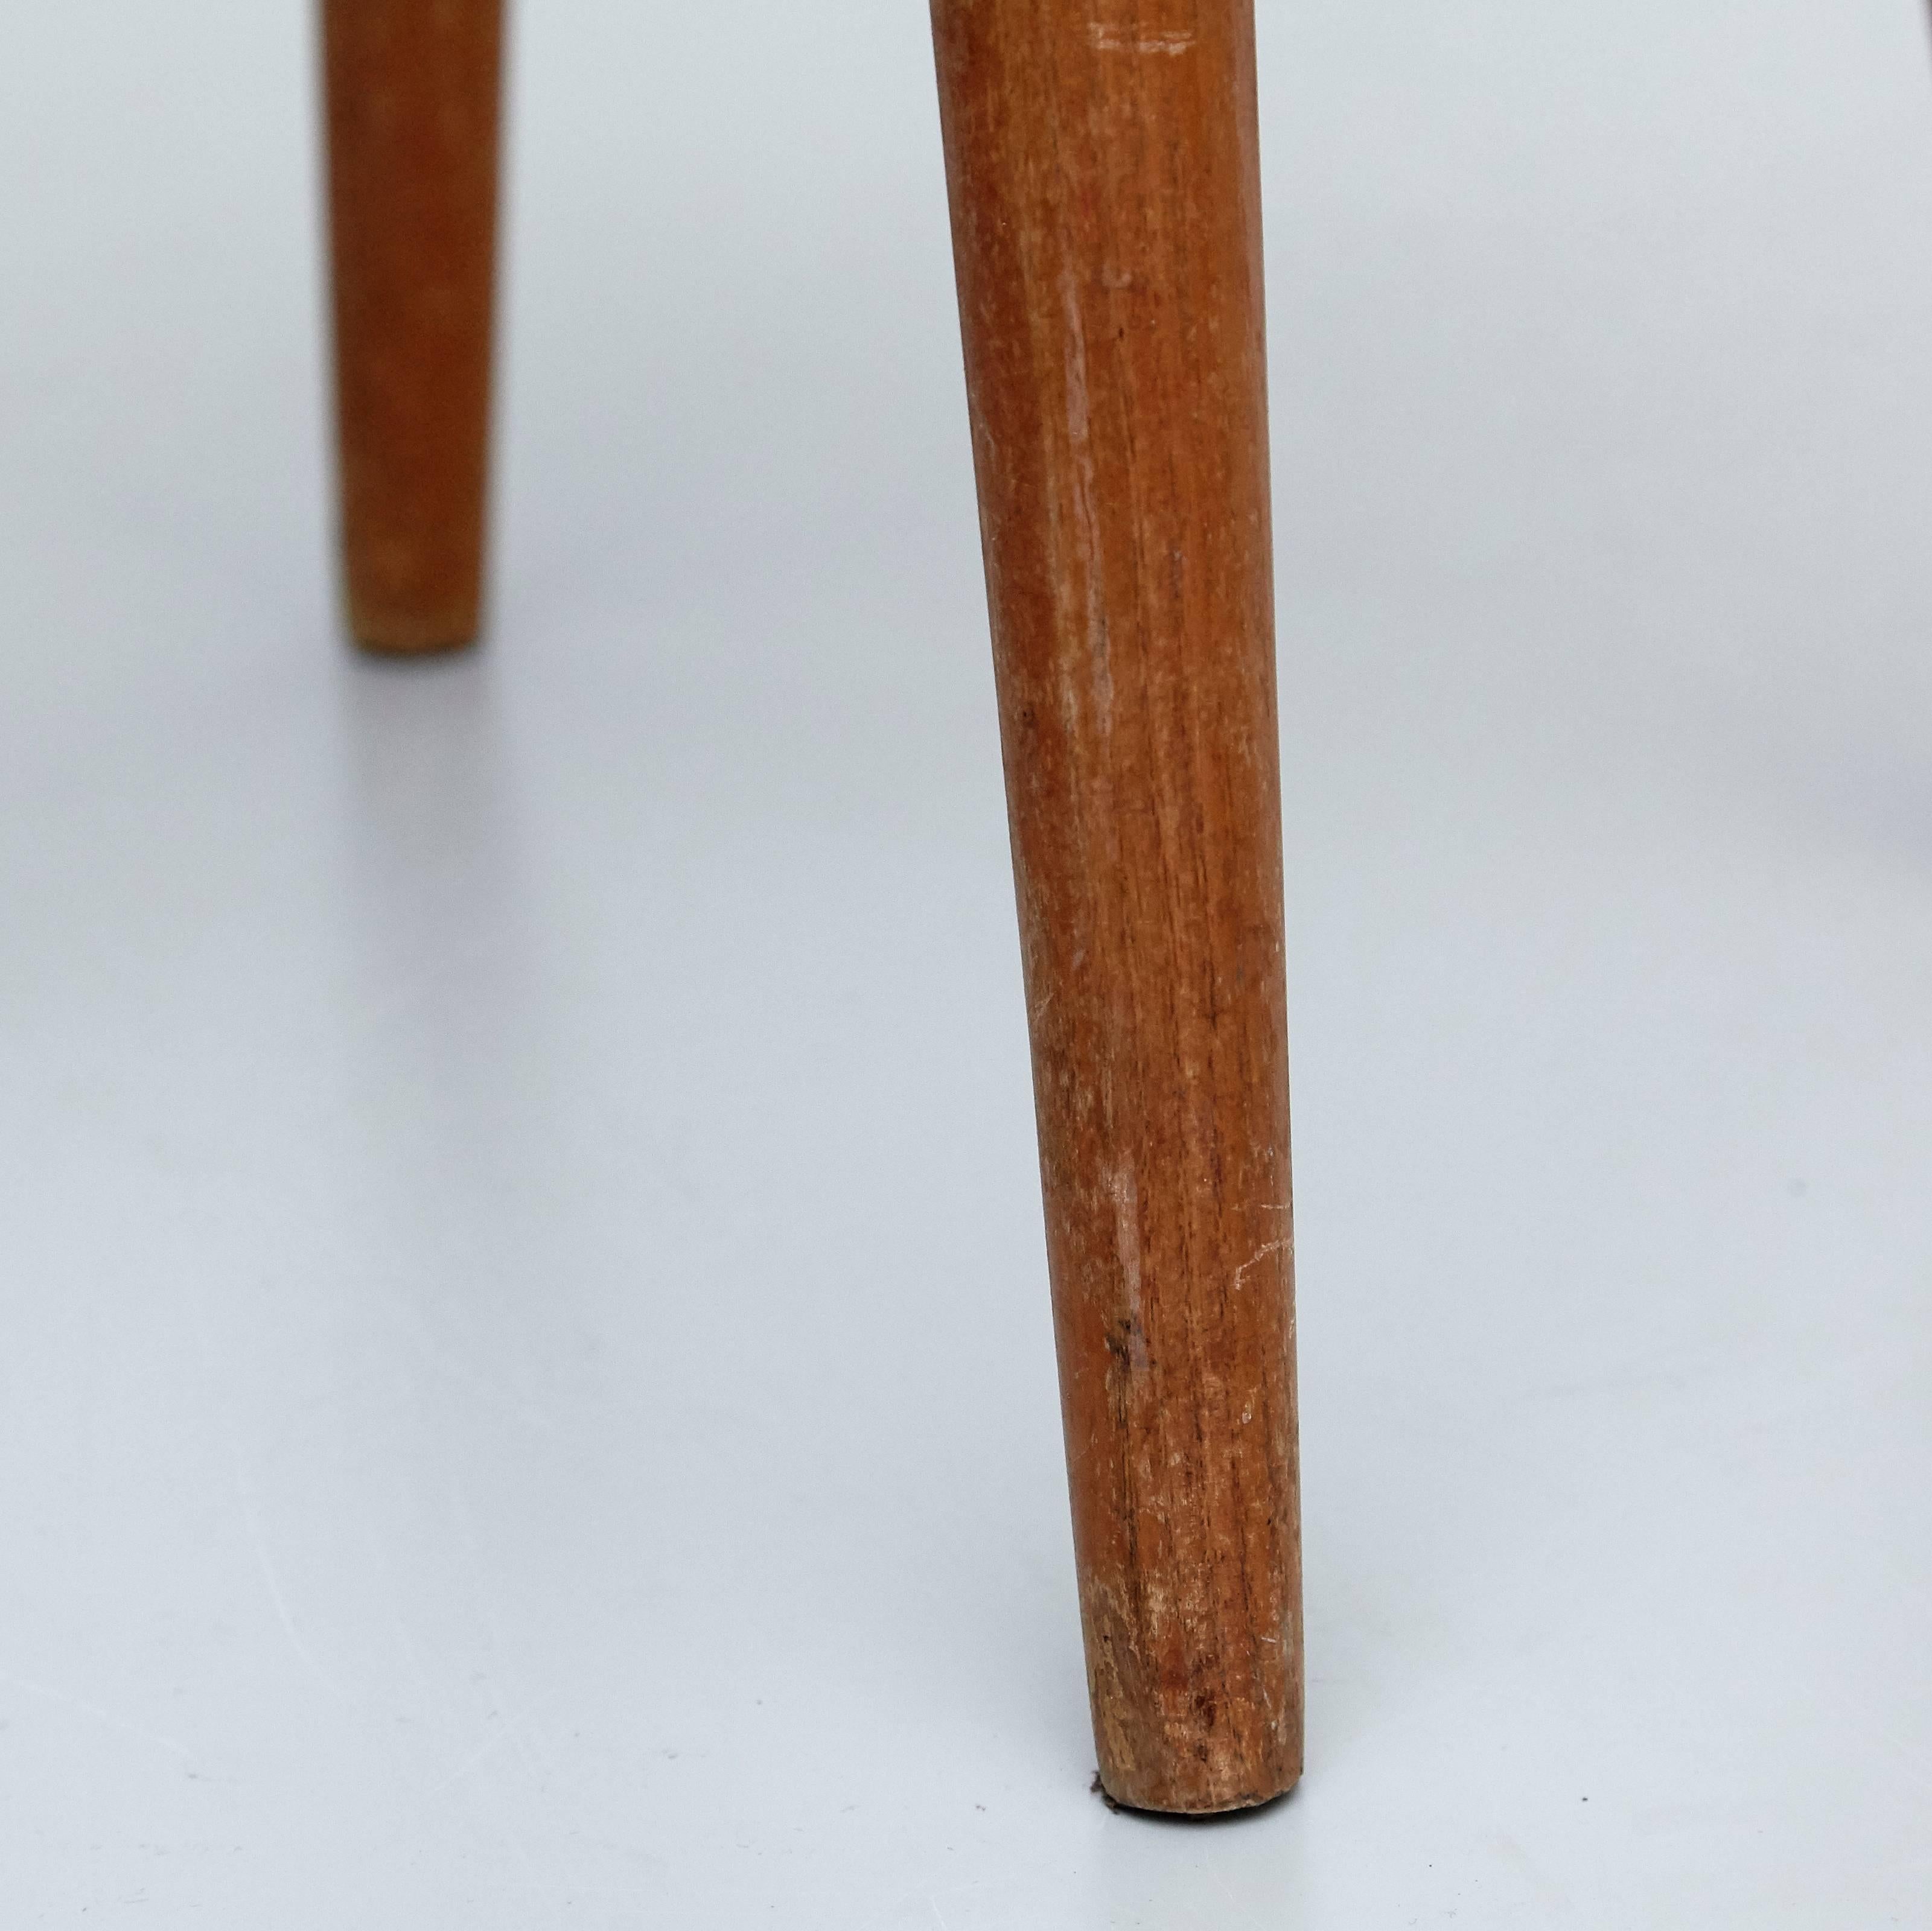 Pierre Jeanneret & Charlotte Perriand Stool 1